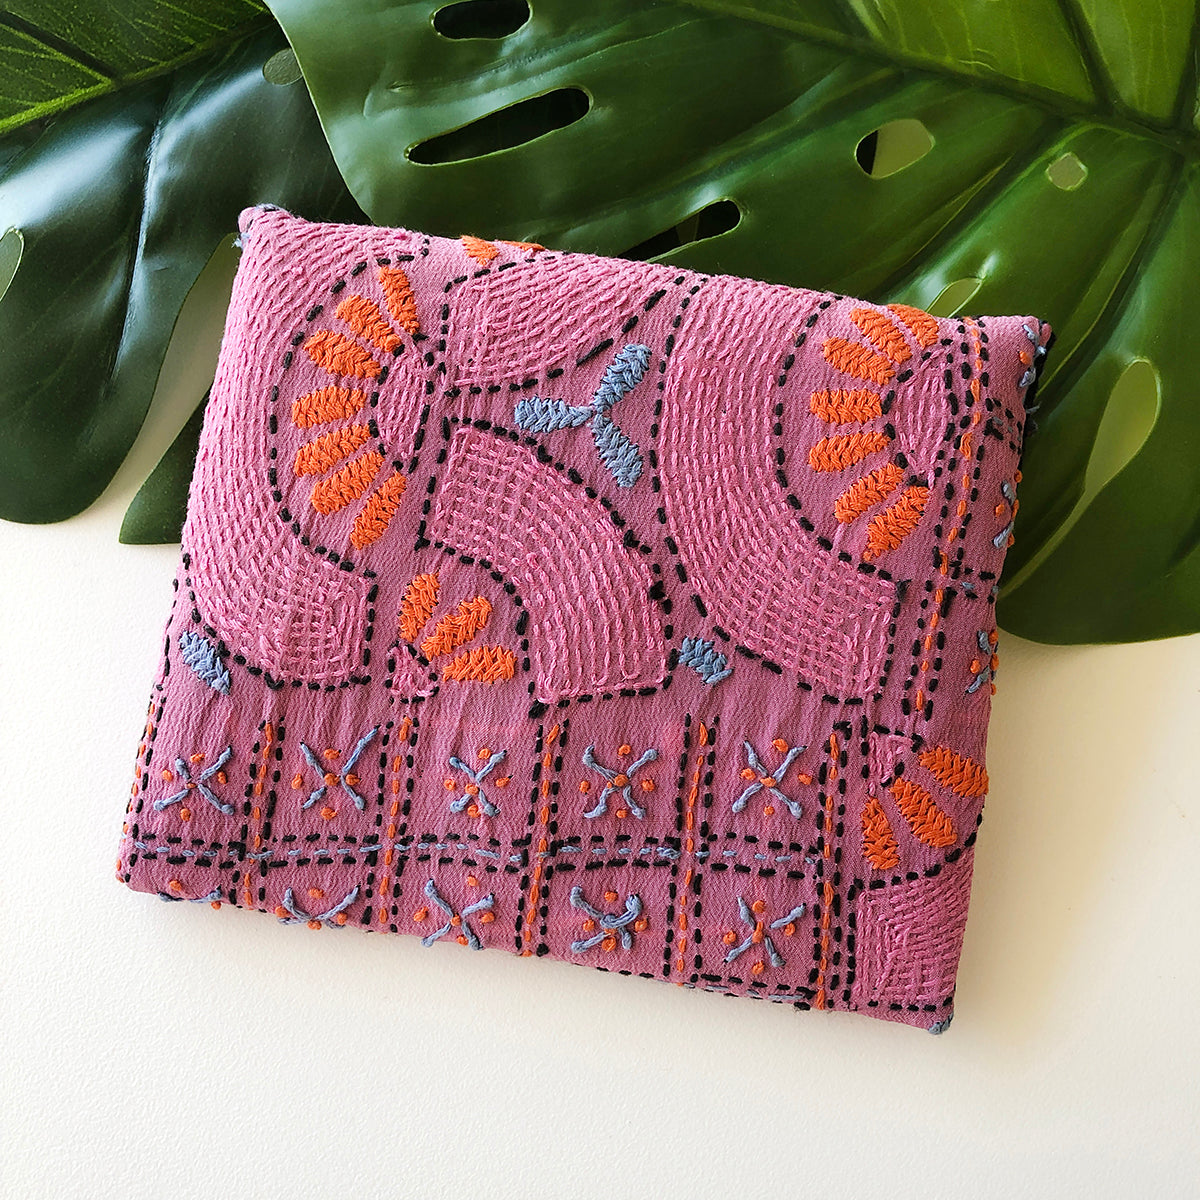 A pink envelope-style pouch features traditional embroidery techniques.